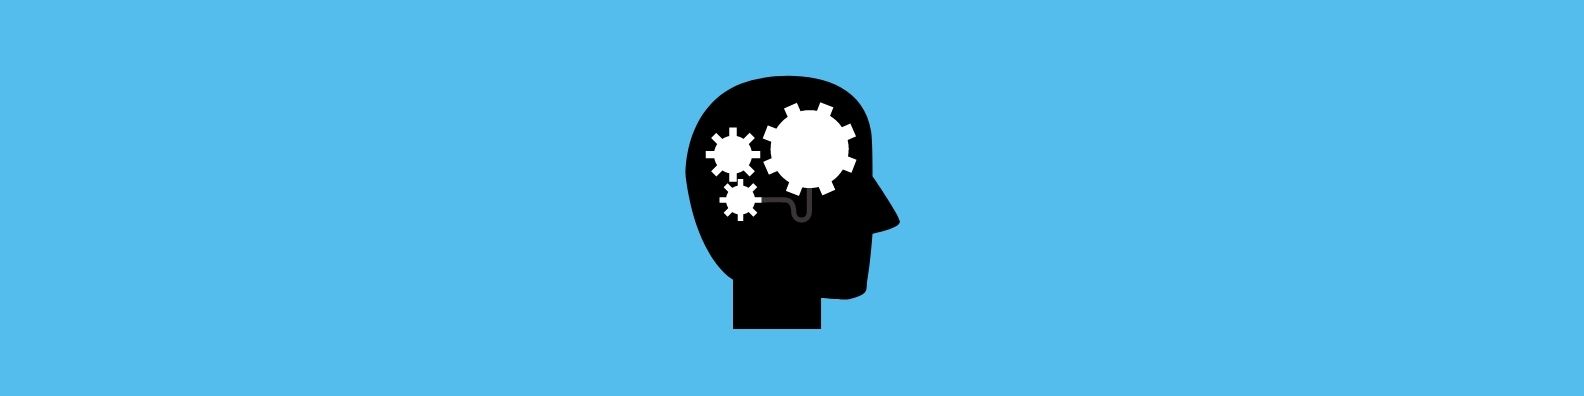 A decorative graphic. The background is a shade of blue with a black and white graphic of a person's head is in the centre. Their head has three white gears in it, suggesting thinking and processing information.